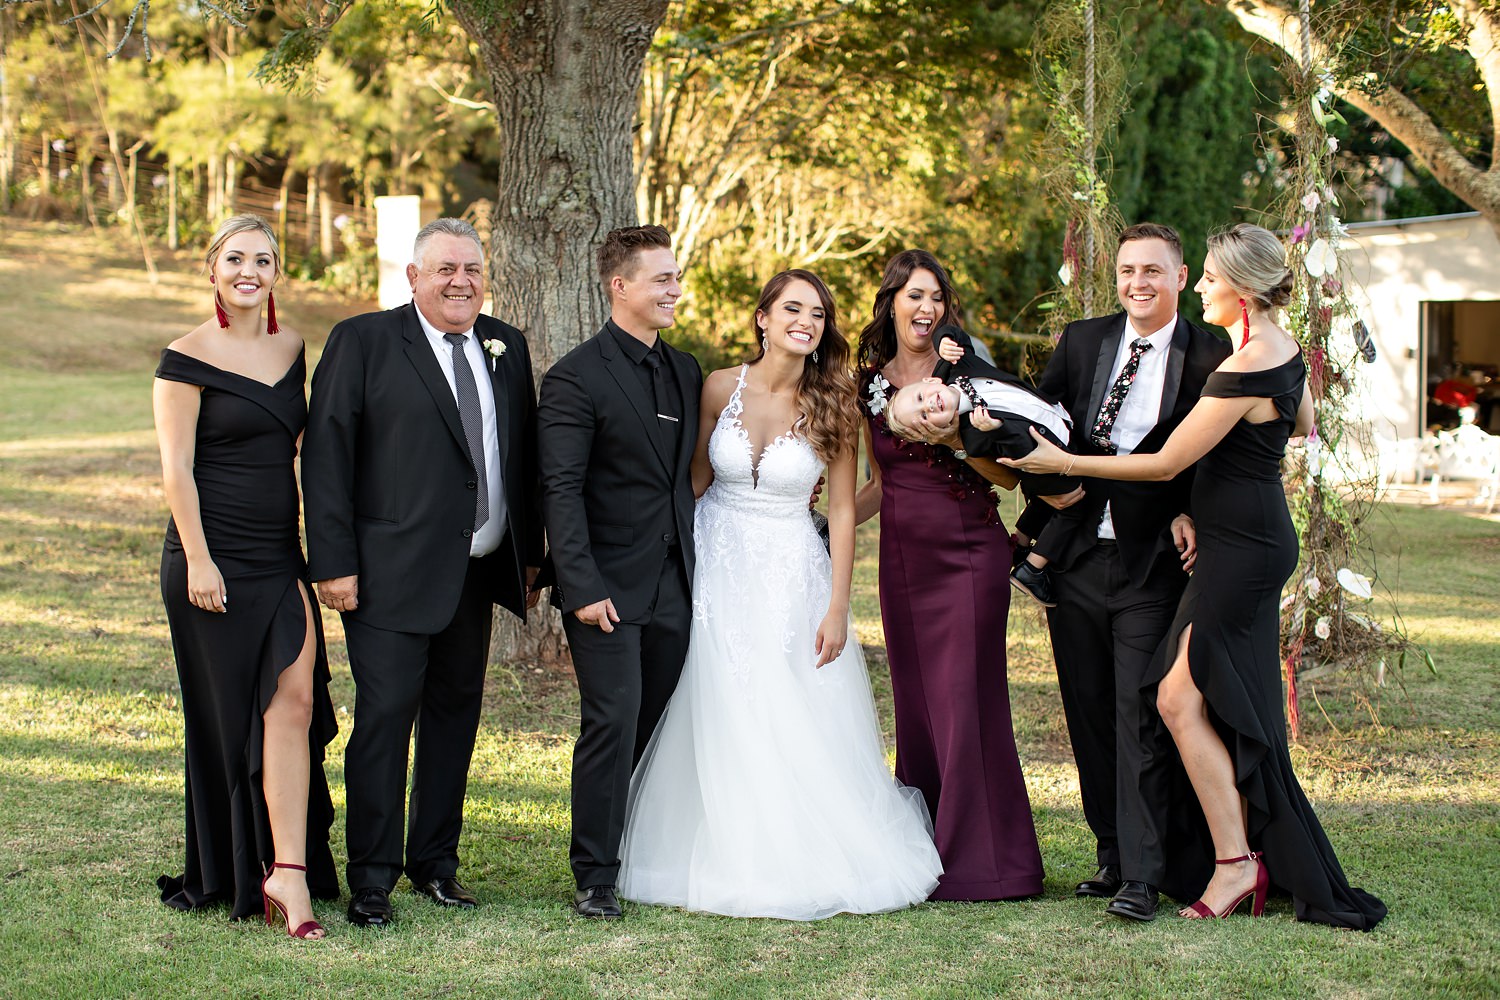 Candid family photographs with lots of laughter and happiness at the Rose Barn wedding venue by wedding photographer in South Africa, Niki M Photography